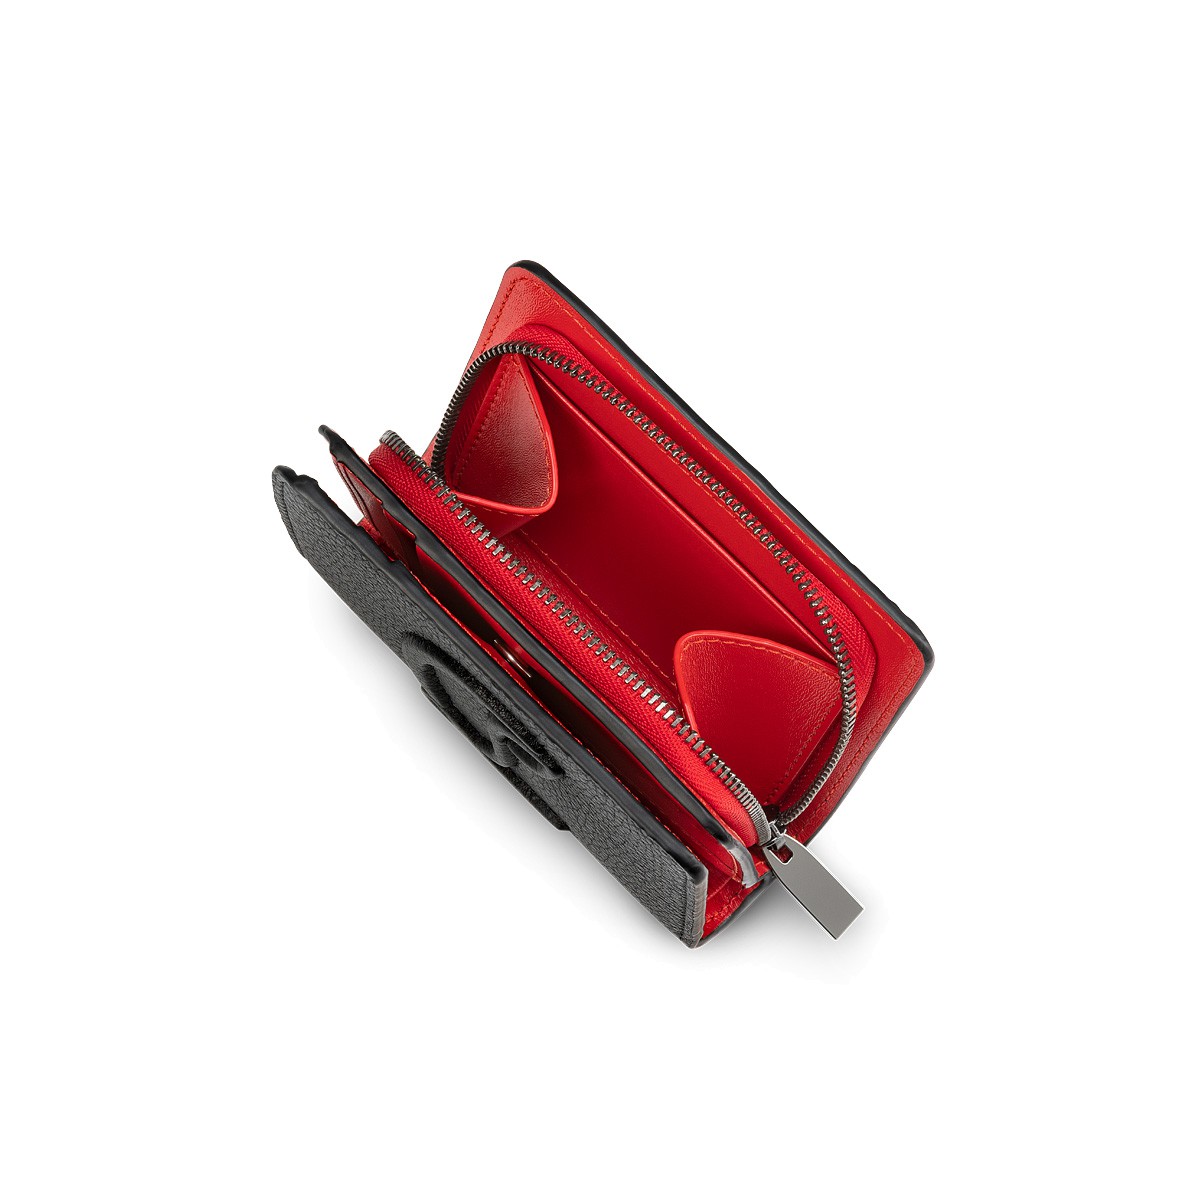 Small Leather Goods - By My Side Wallet - Christian Louboutin